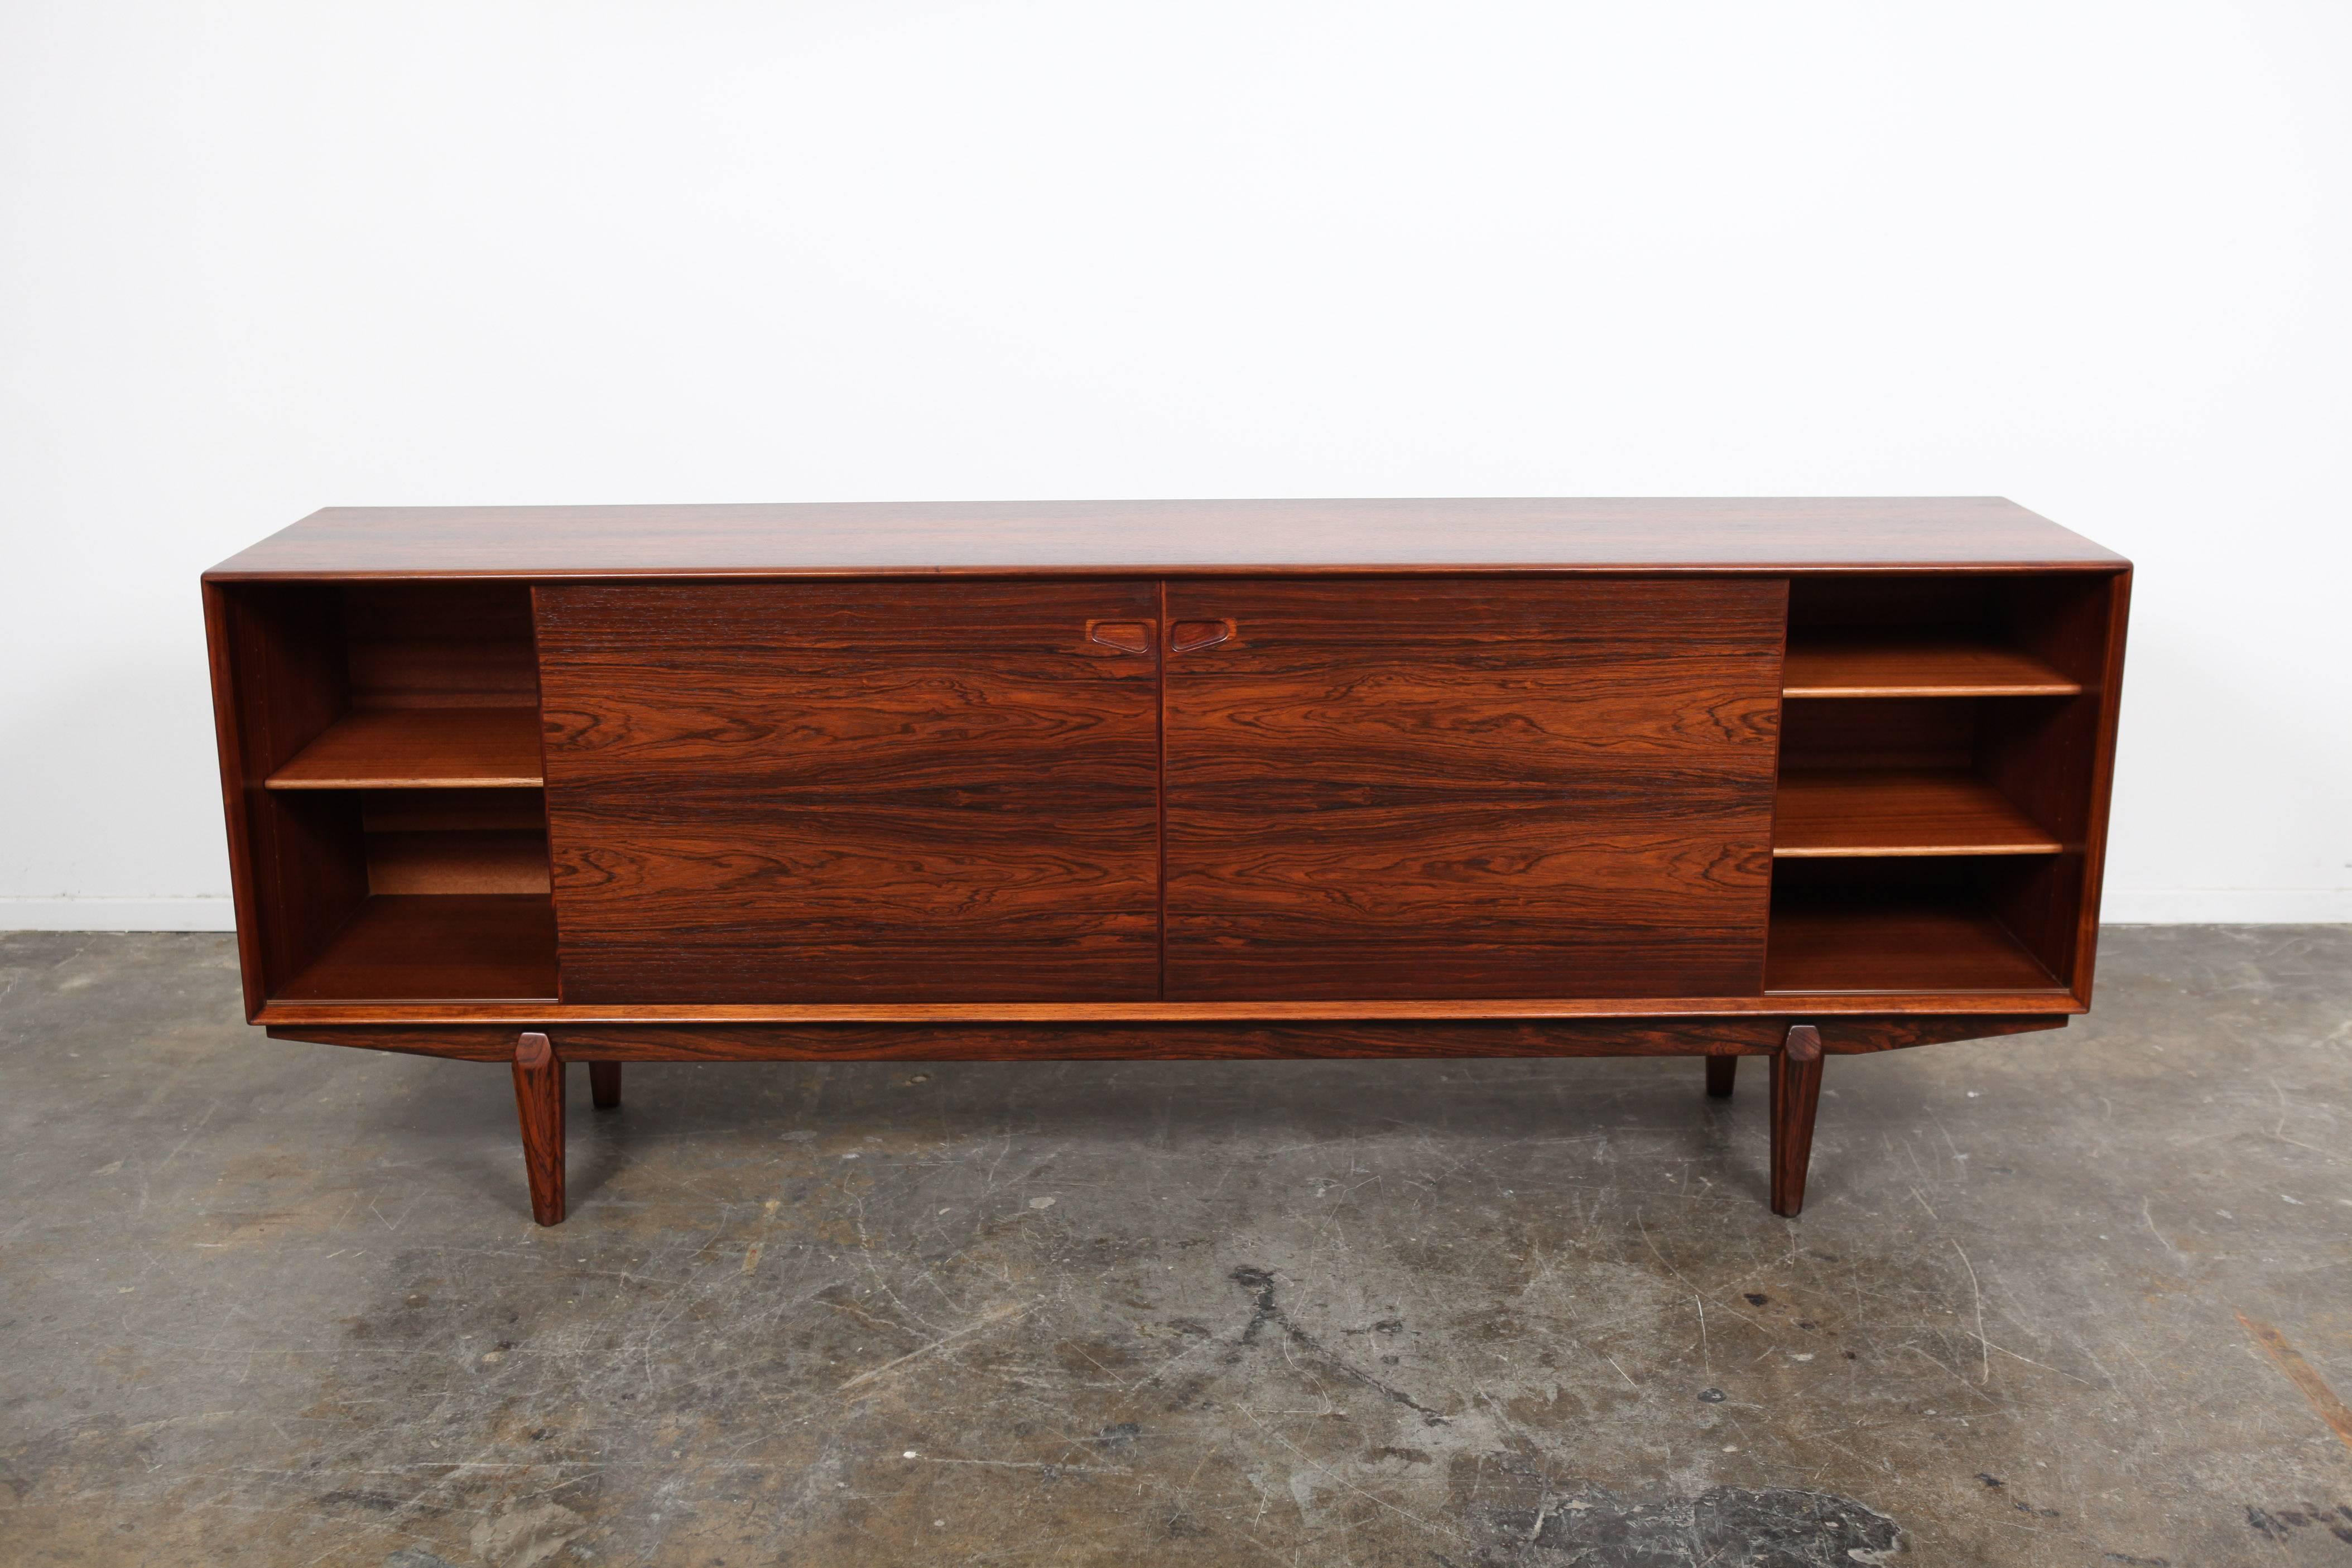 Danish Mid-Century Modern low rosewood sideboard with ouvered drawers with sculptural pulls designed by Skovby Møbelfabrik, model number 75. Excellent bookmatched grain on doors and top of piece.